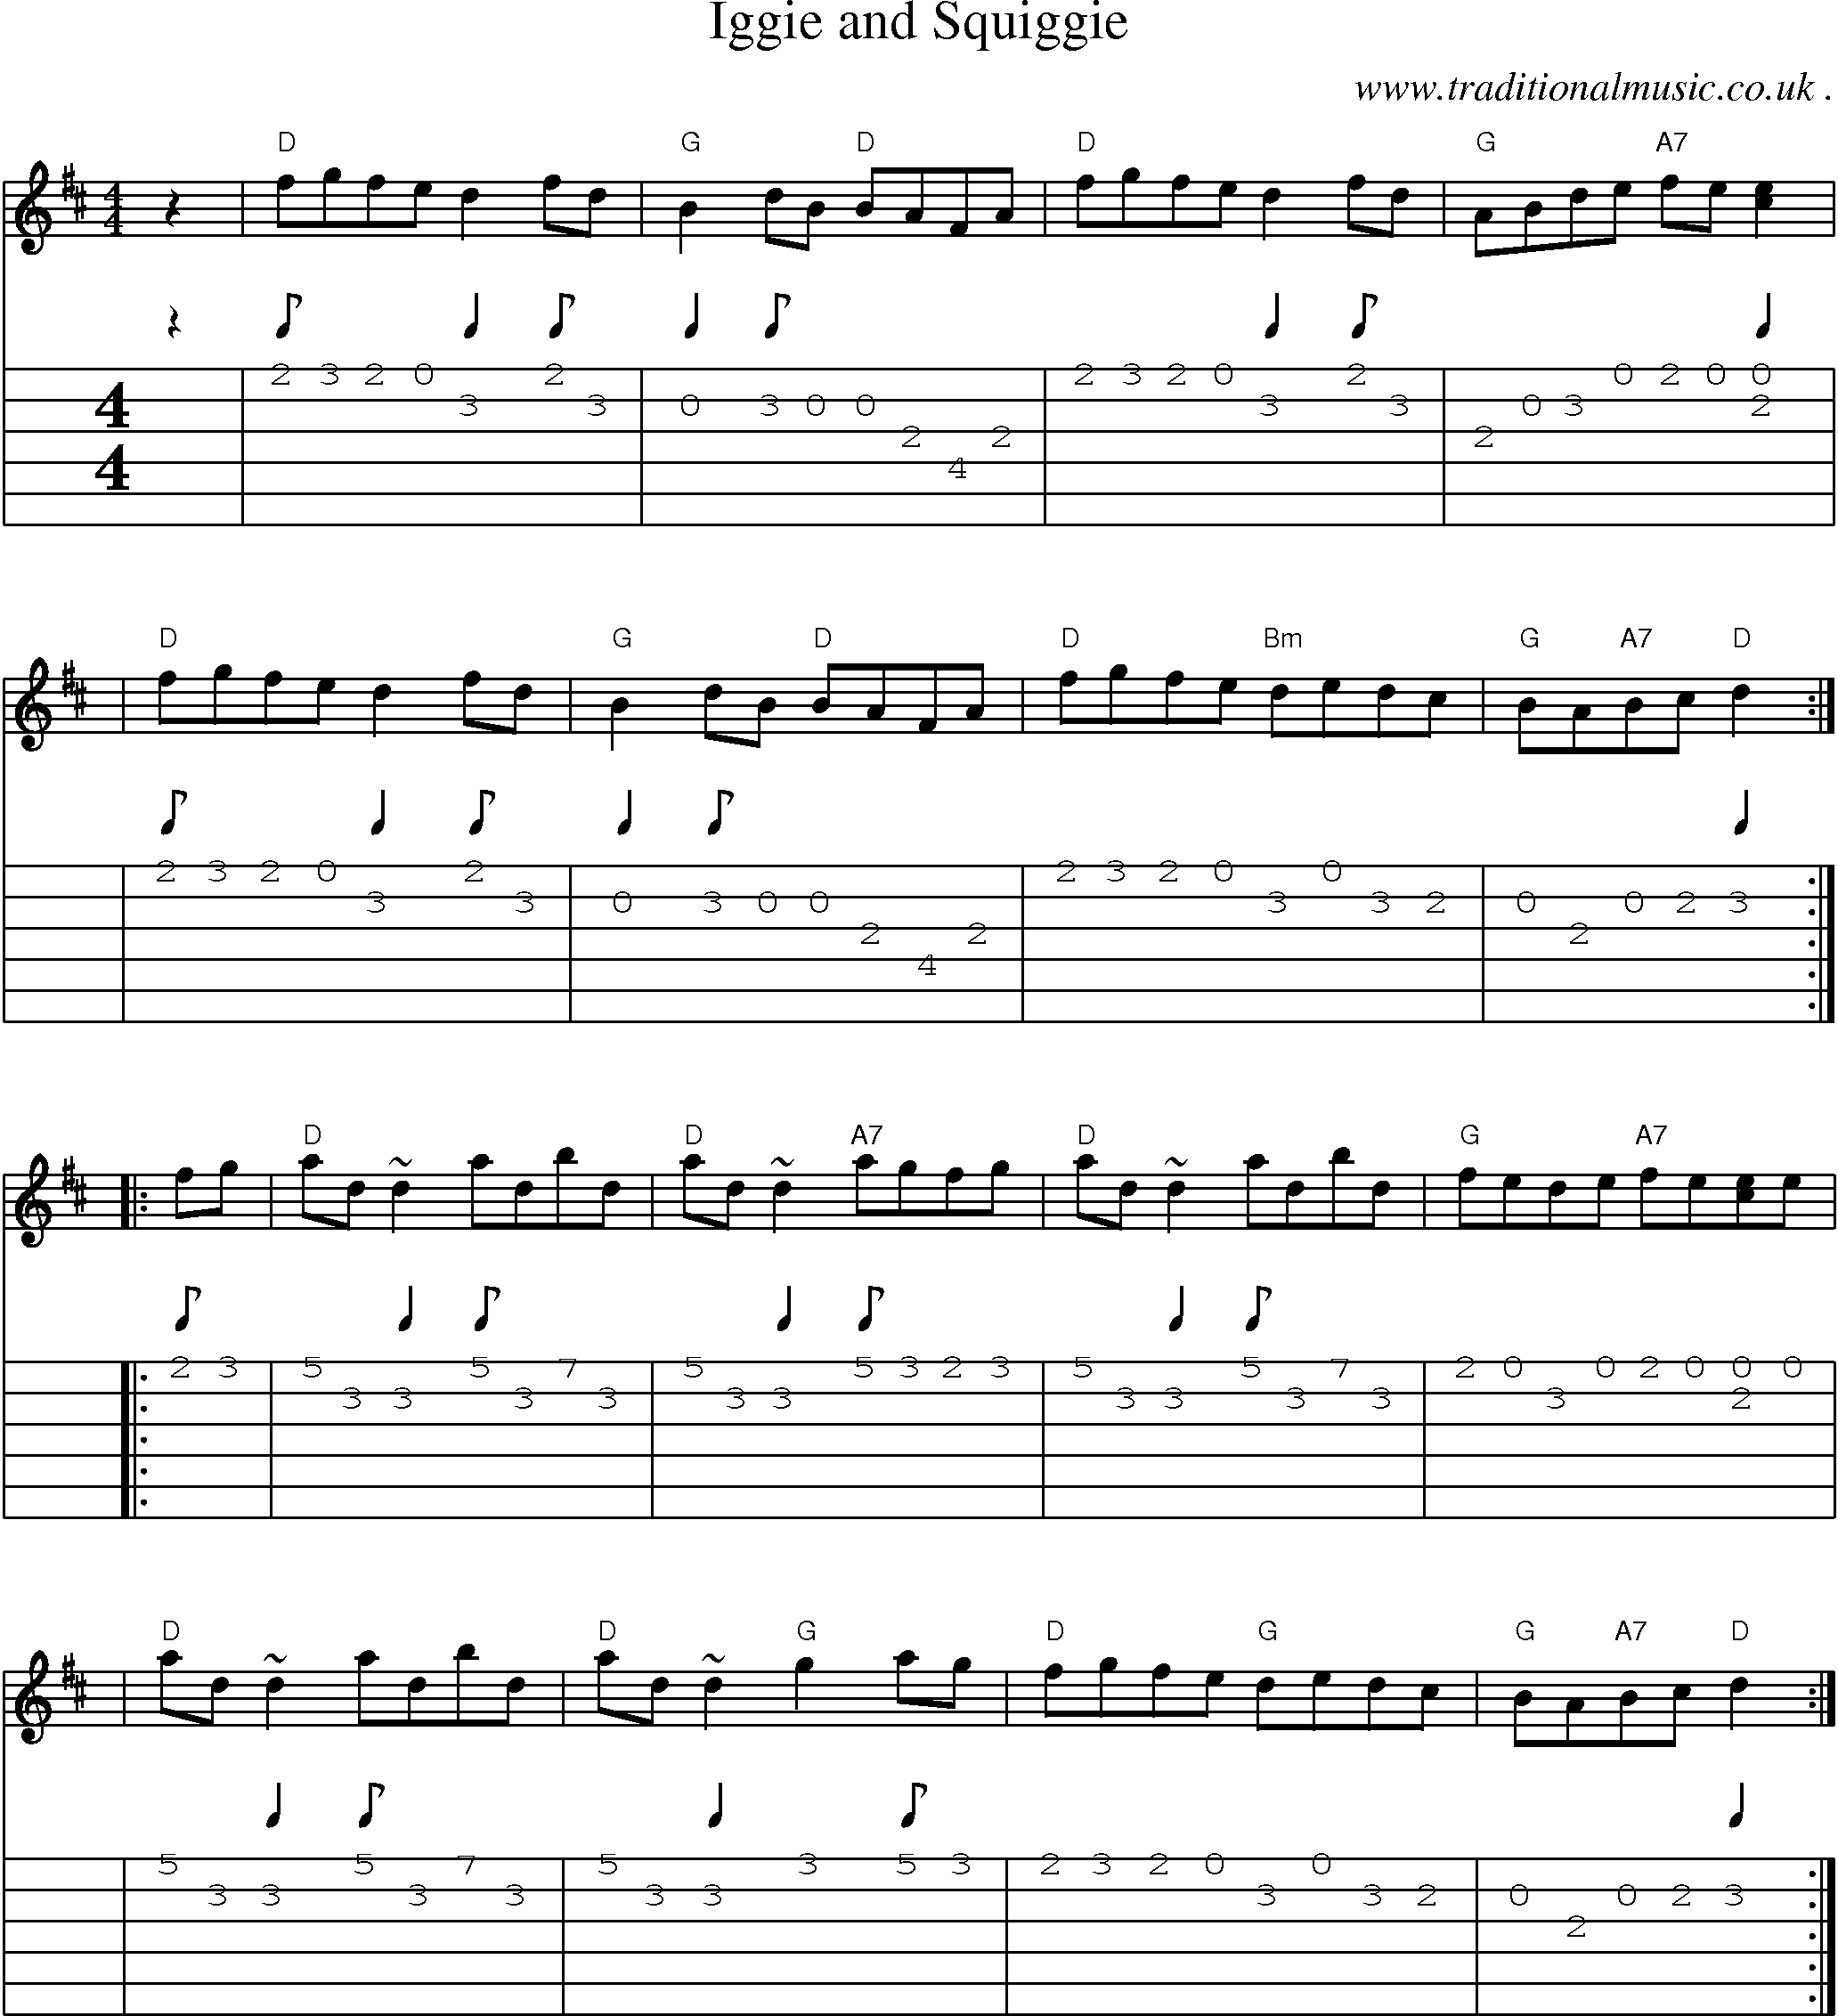 Sheet-music  score, Chords and Guitar Tabs for Iggie And Squiggie